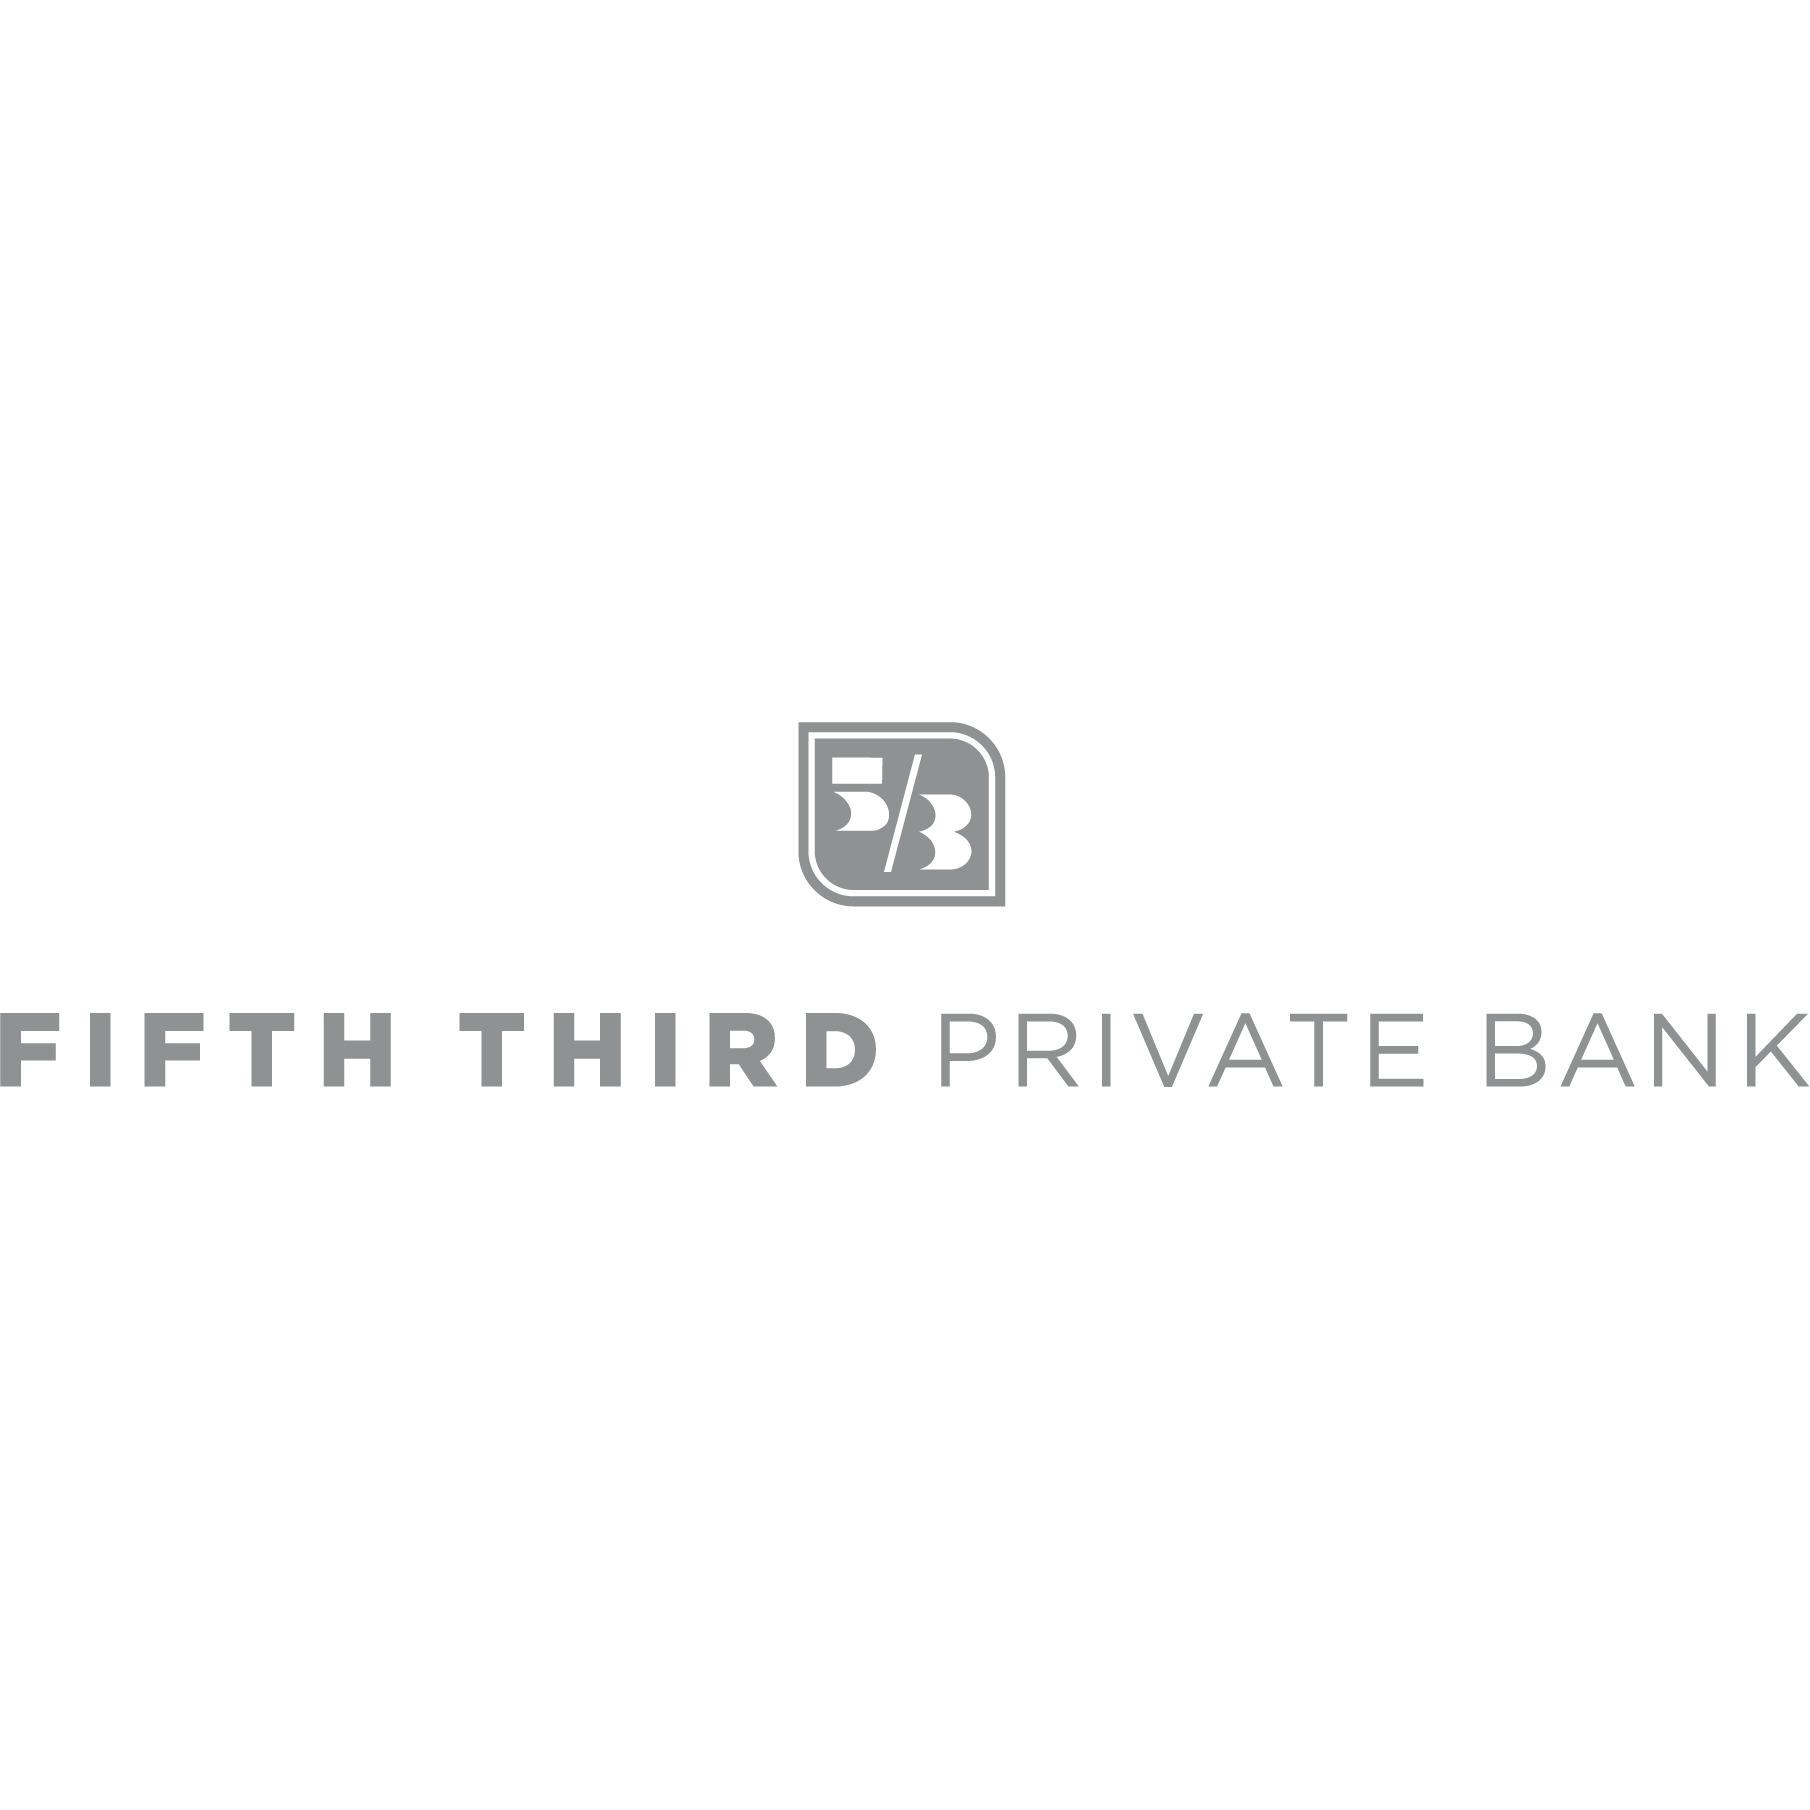 Fifth Third Private Bank - Sam Pate